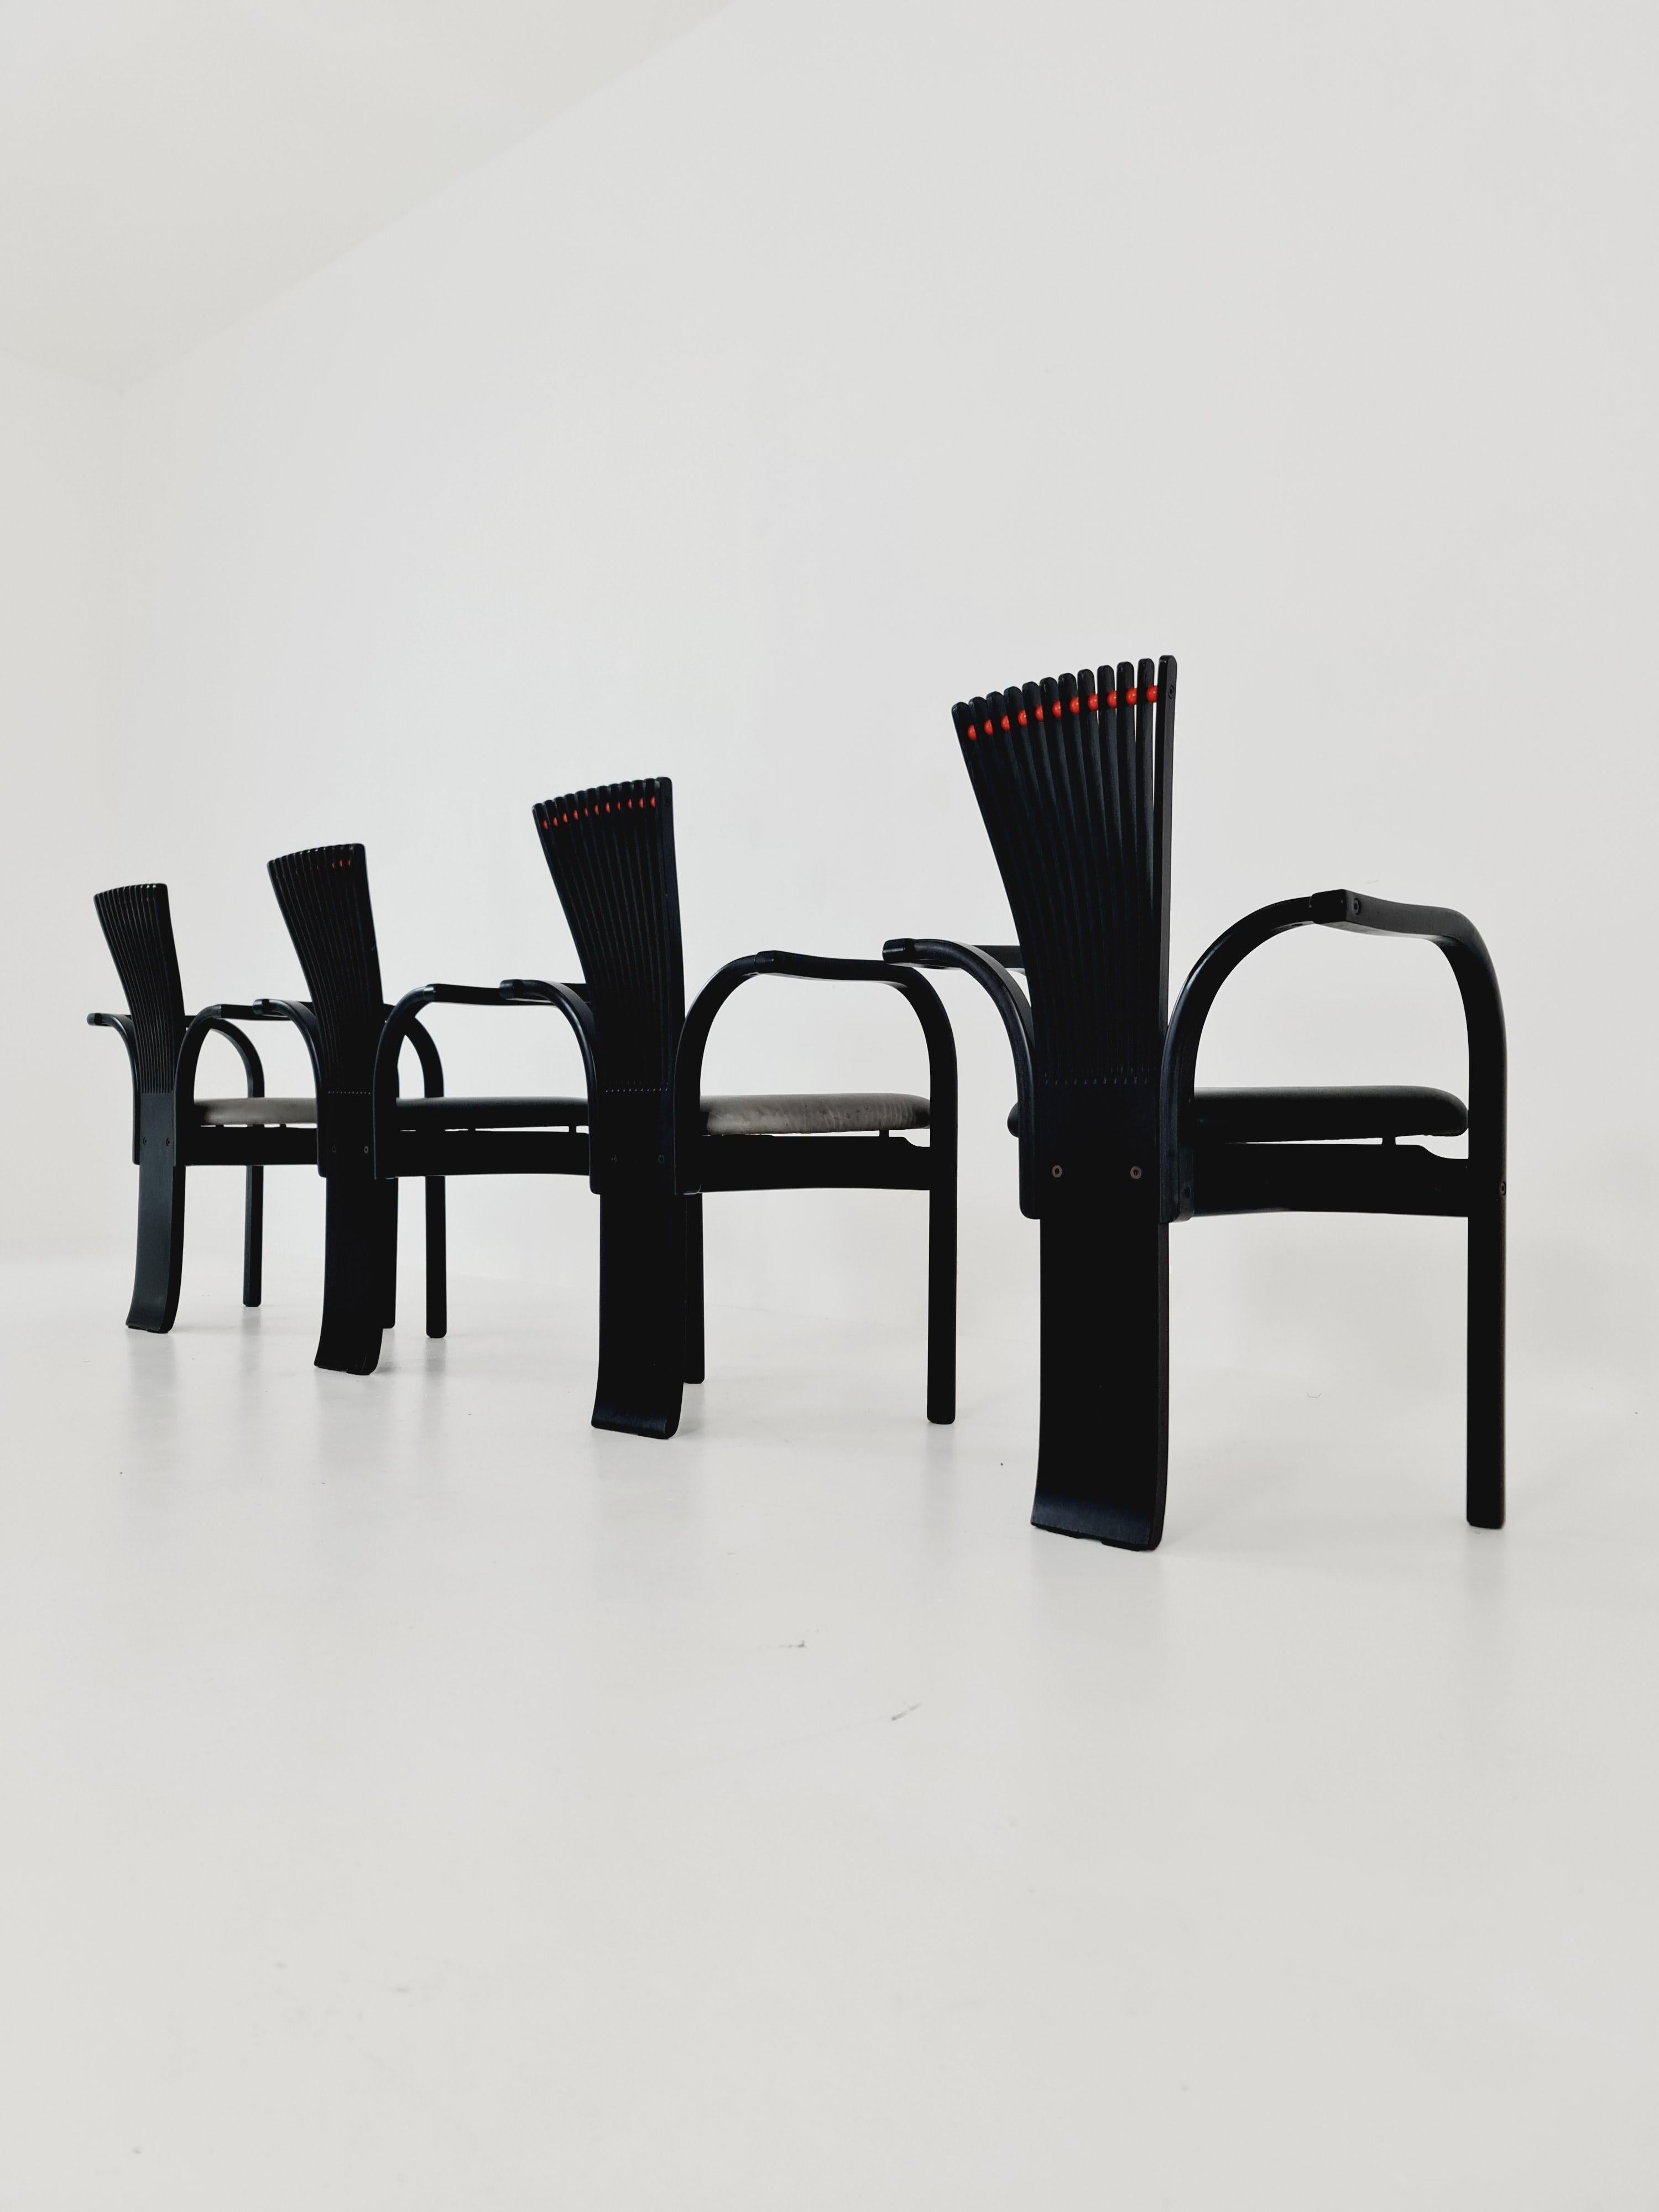 4 Totem dining chairs by Torstein Nilsen for Westnofa, Italian design table For Sale 4